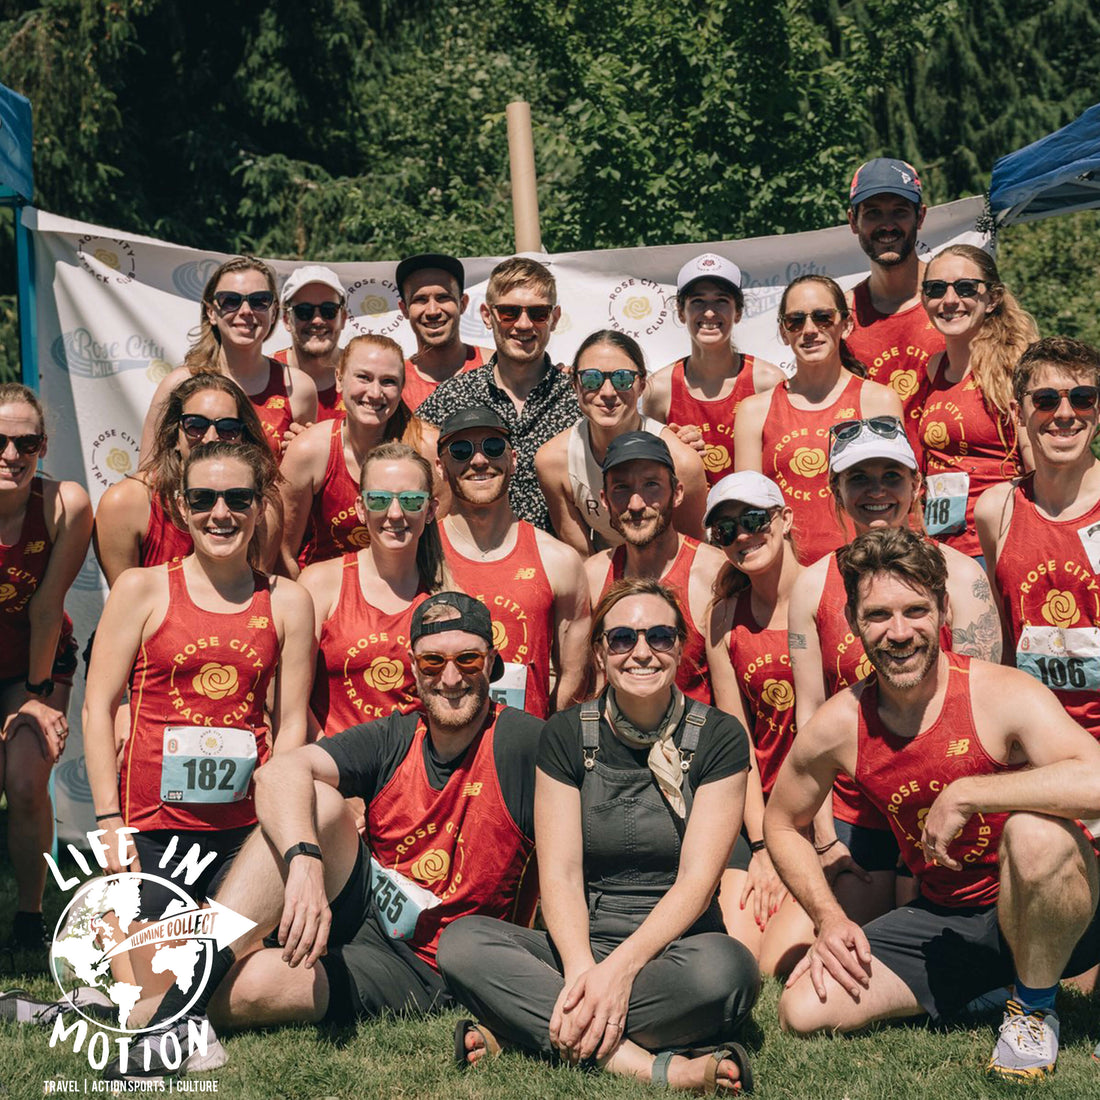 More Than Just Movement: A conversation with Ryan Yambra of Rose City Track Club